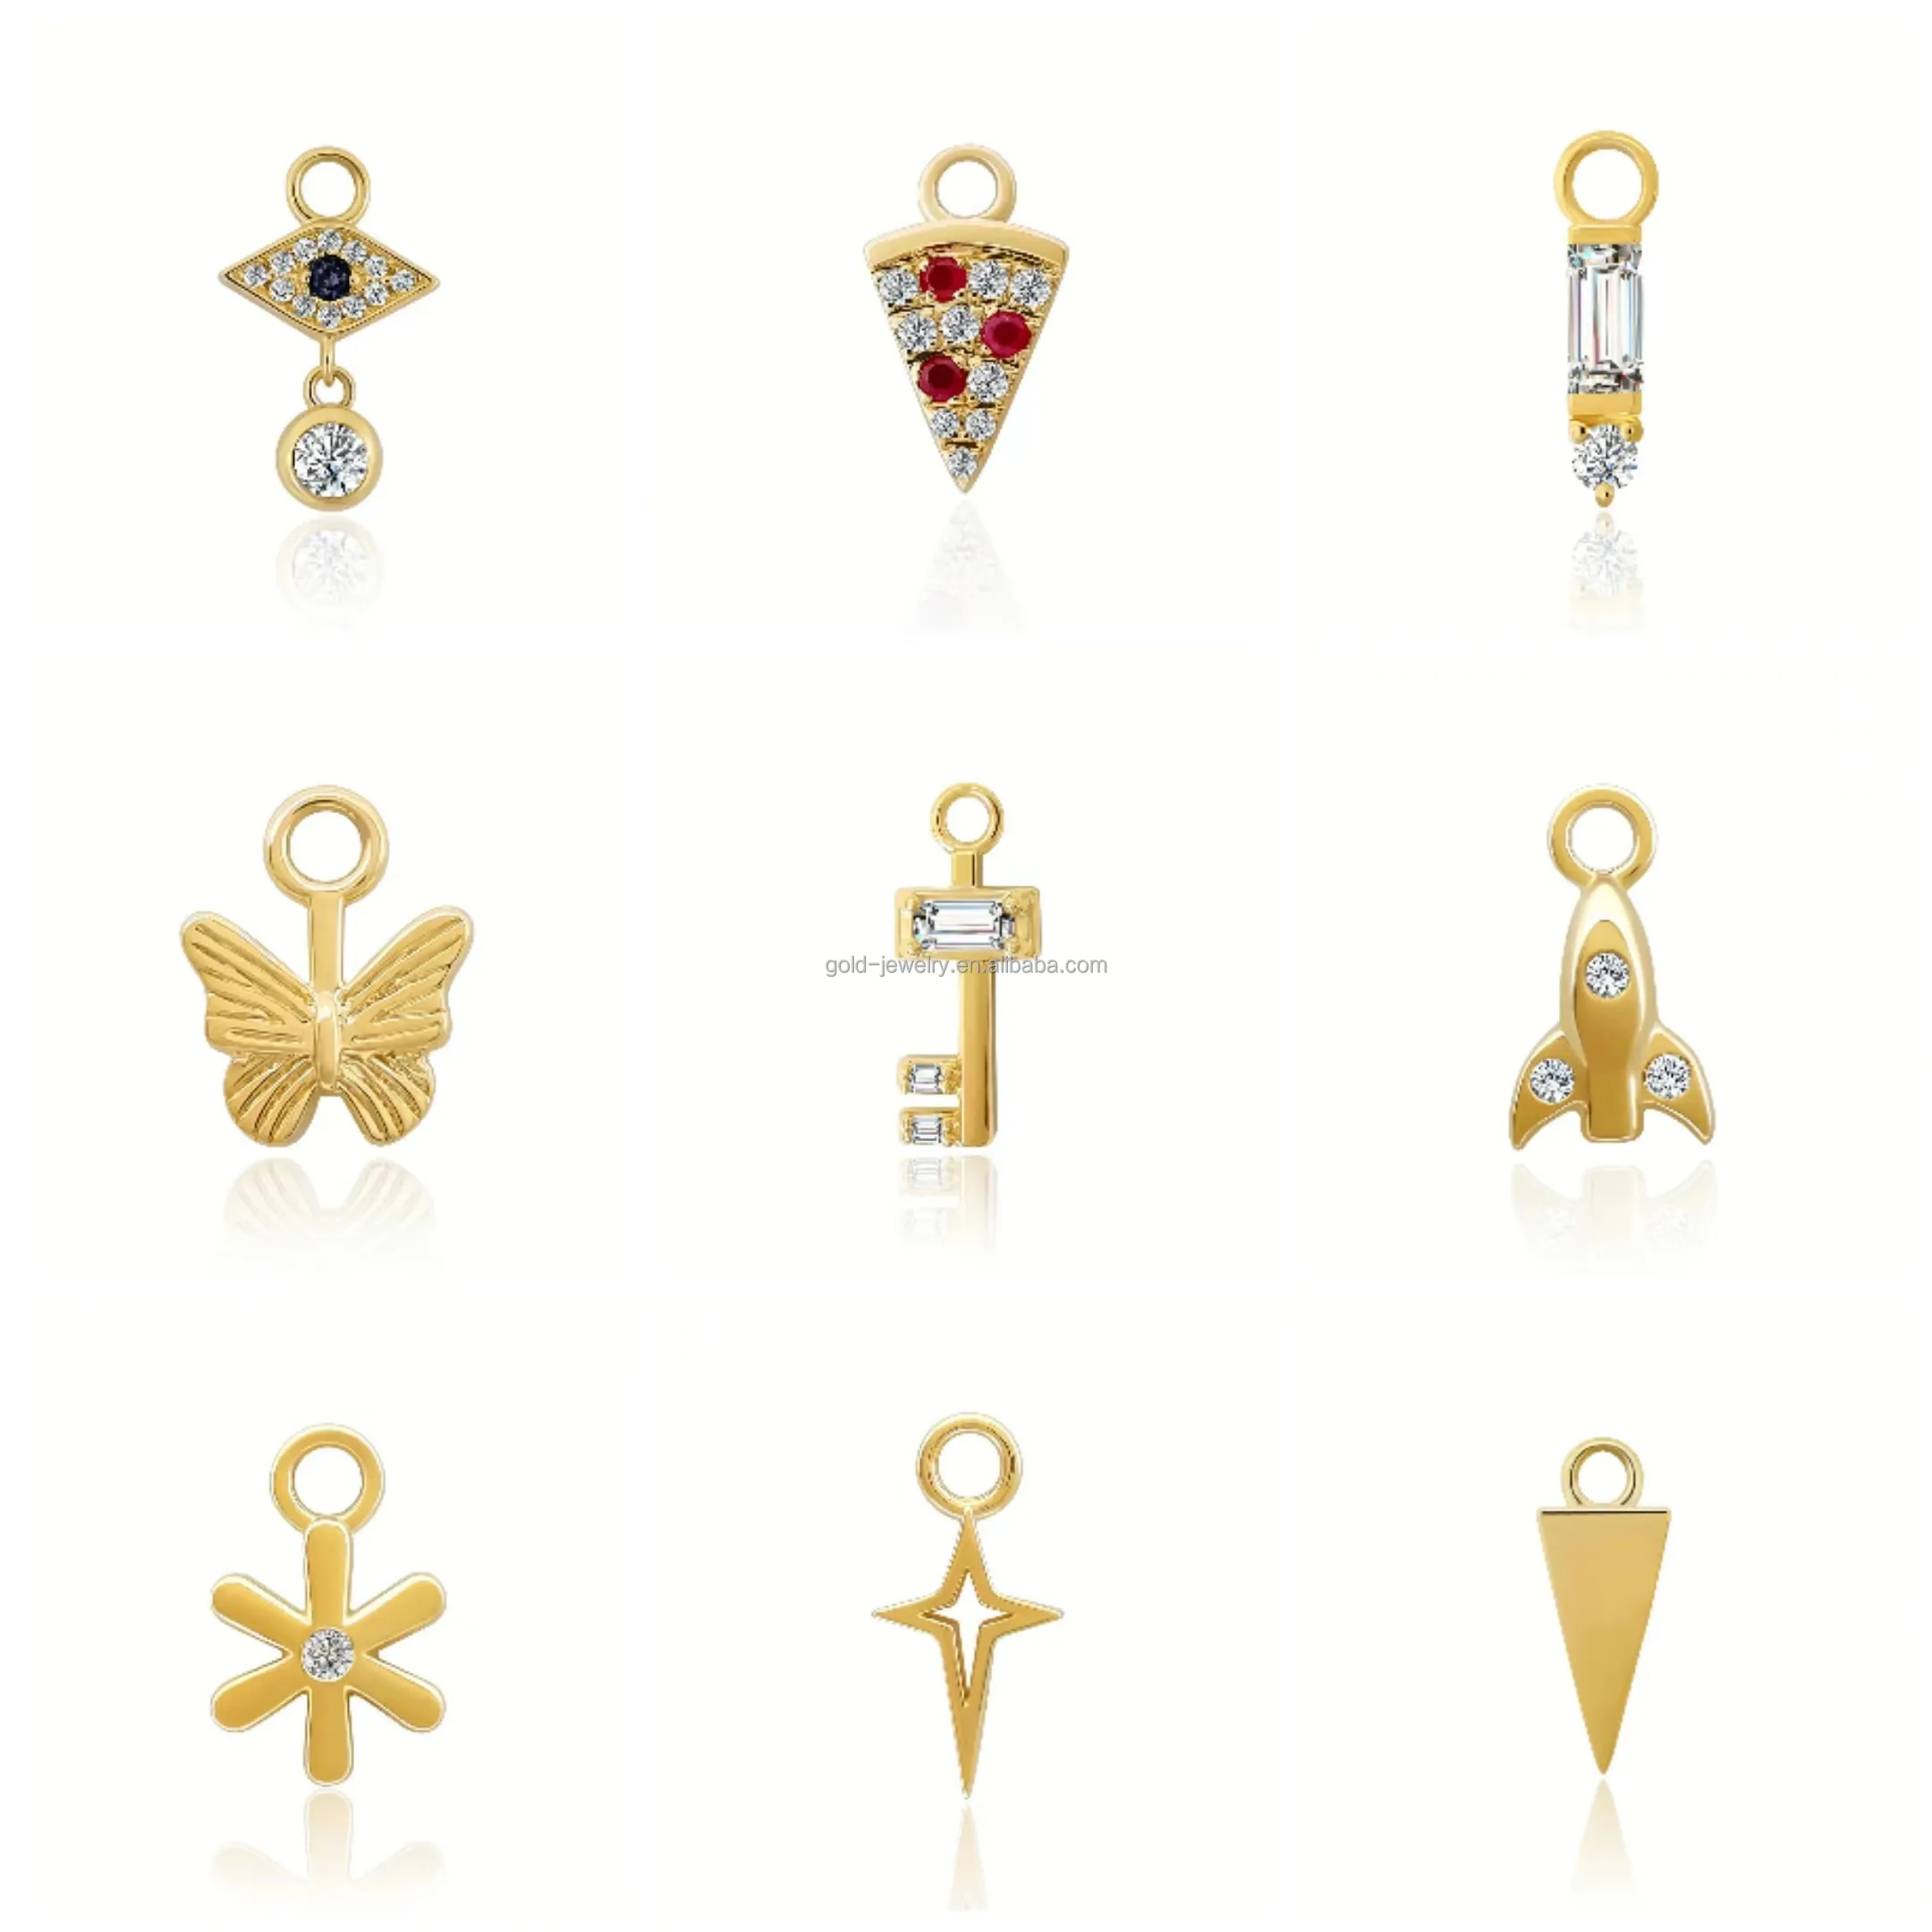 14K Gold Jewelry DIY Pendant Charms Pure Gold Jewelry For Bracelet Necklaces Earrings Accessory